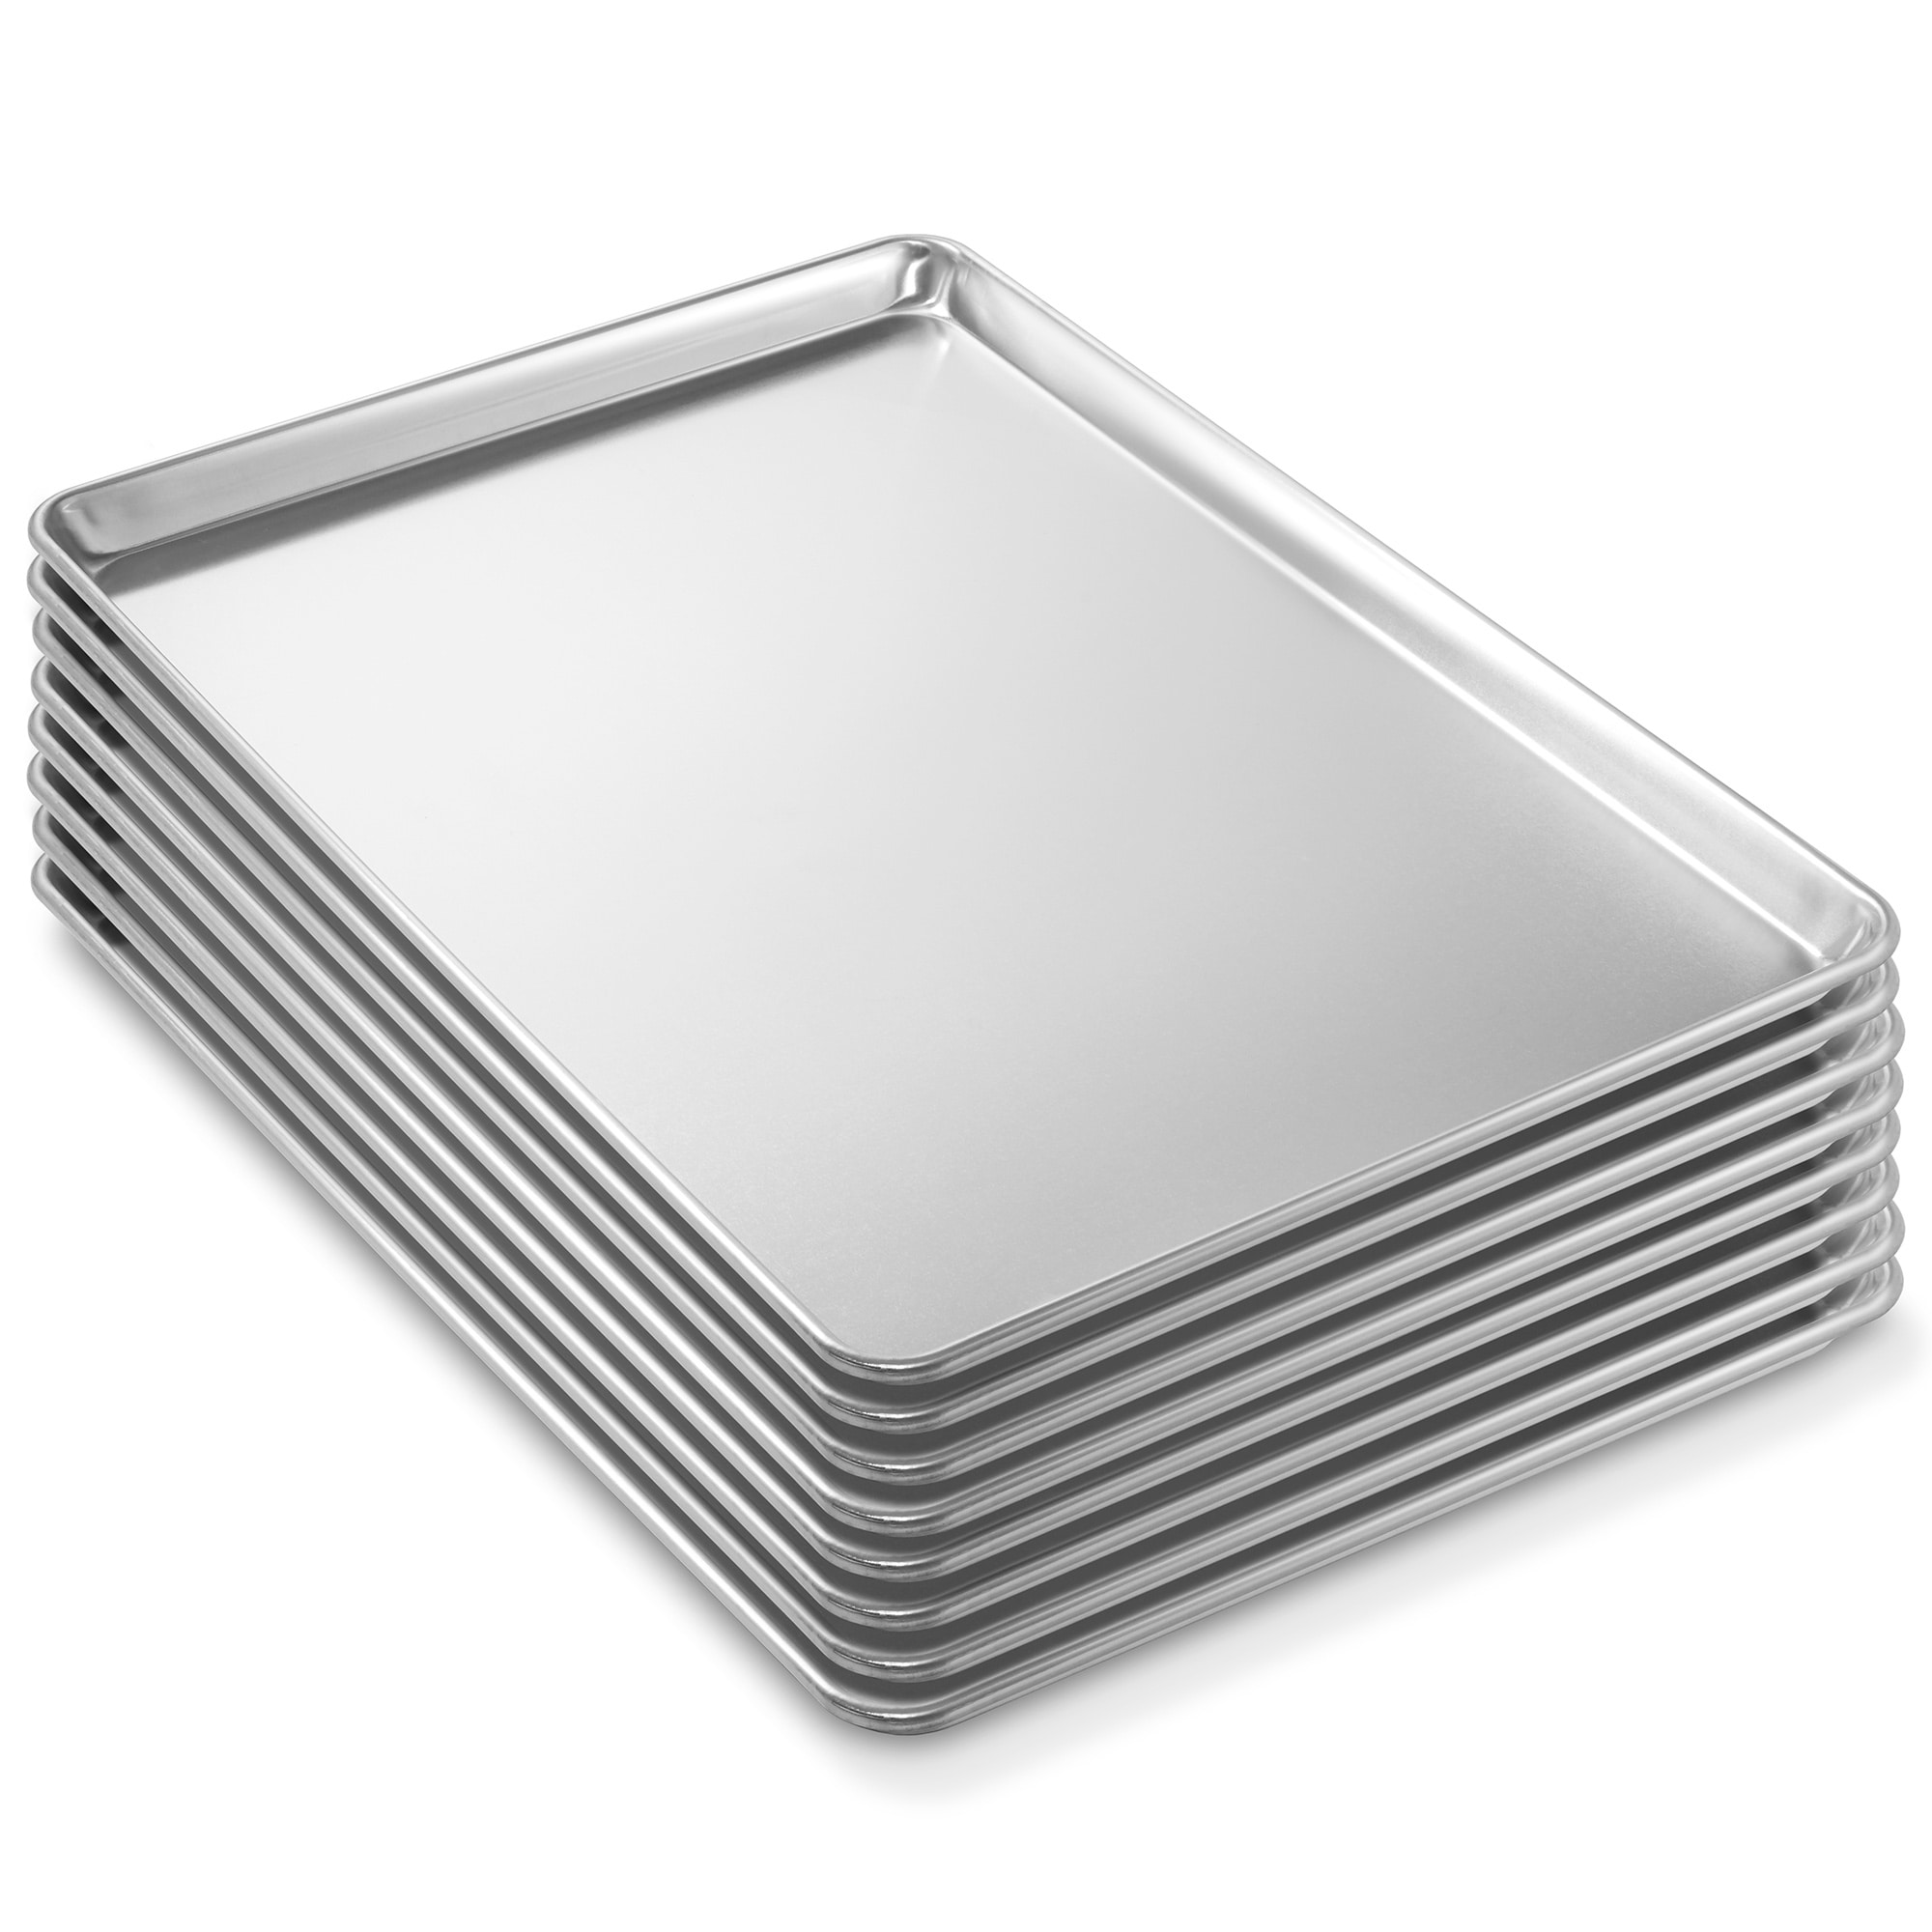 Nordic Ware Natural Aluminum Commercial Baker's Half Sheet, 2-Pack, Silver  &, fits all standard Big Extra Large Baking Sheet Pan, Silver